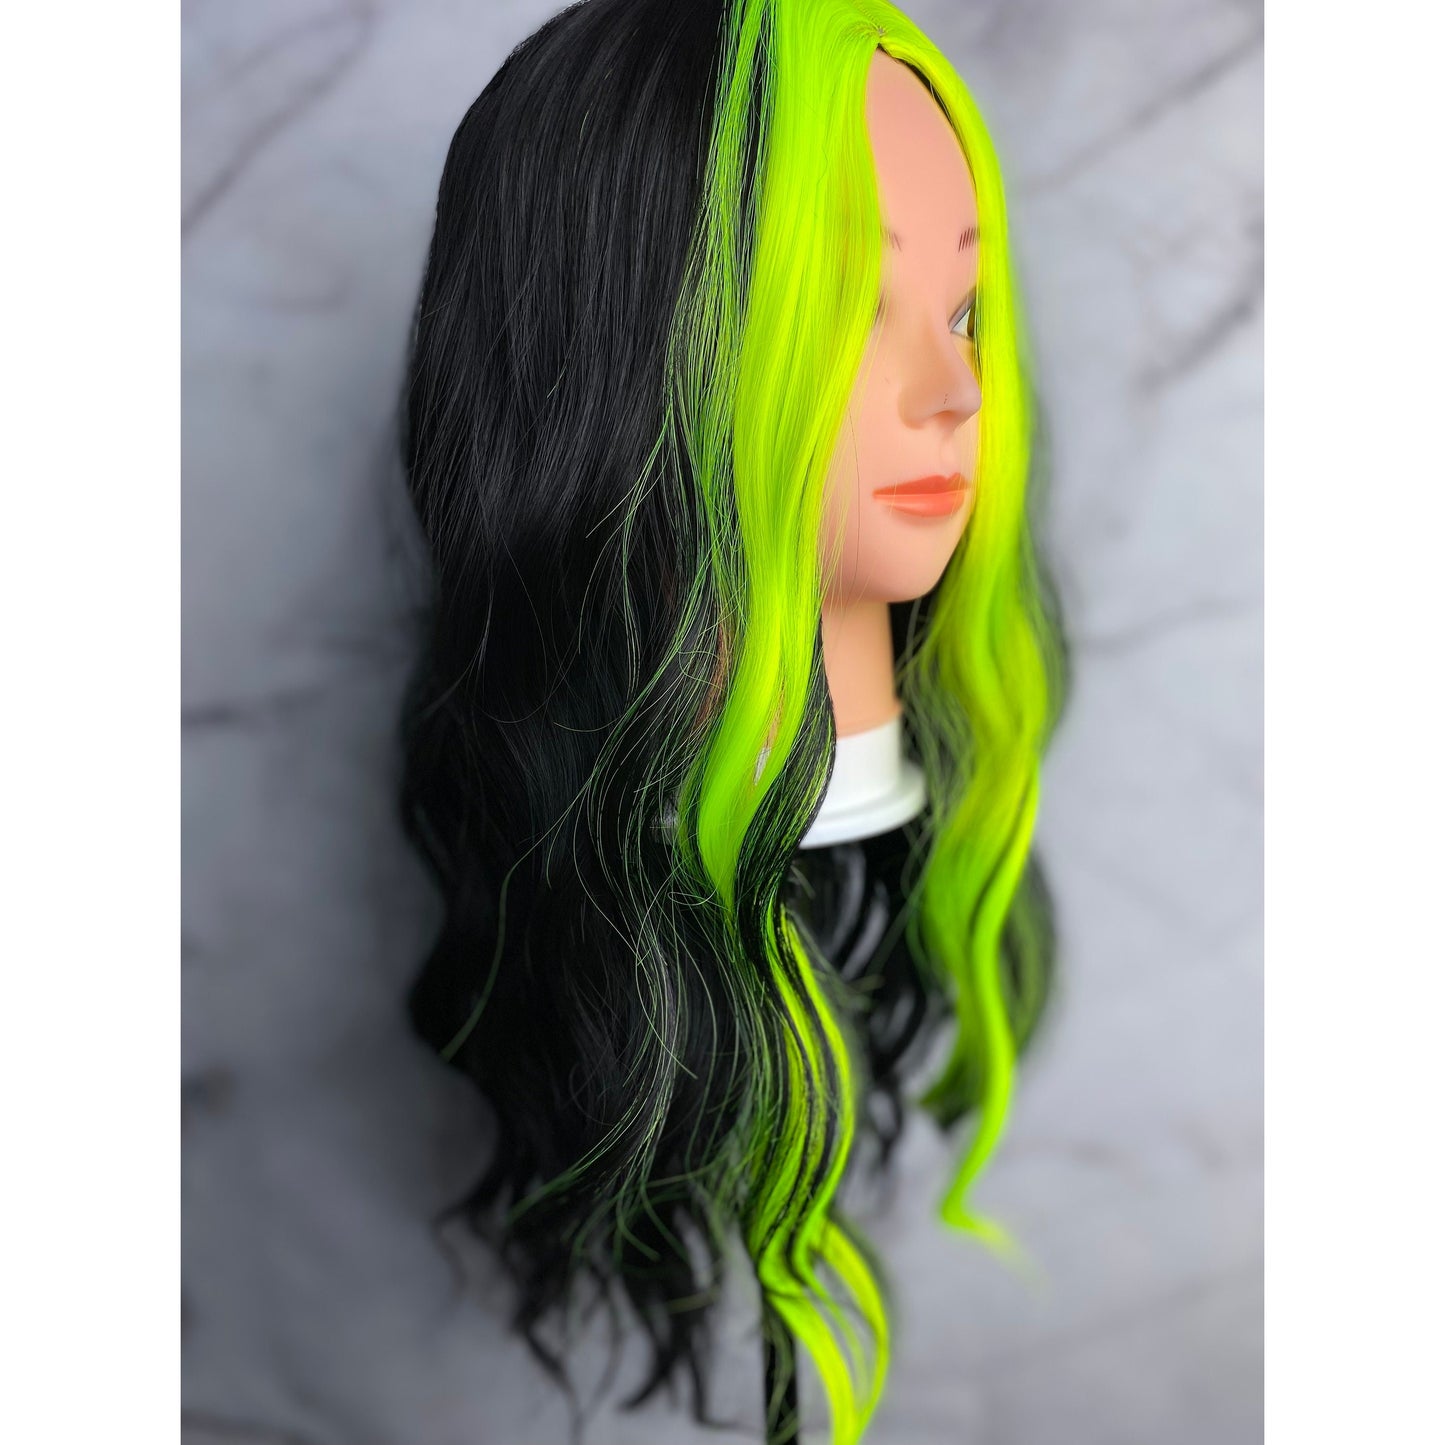 Black and Neon Green Wig,Curly Wavy Wig